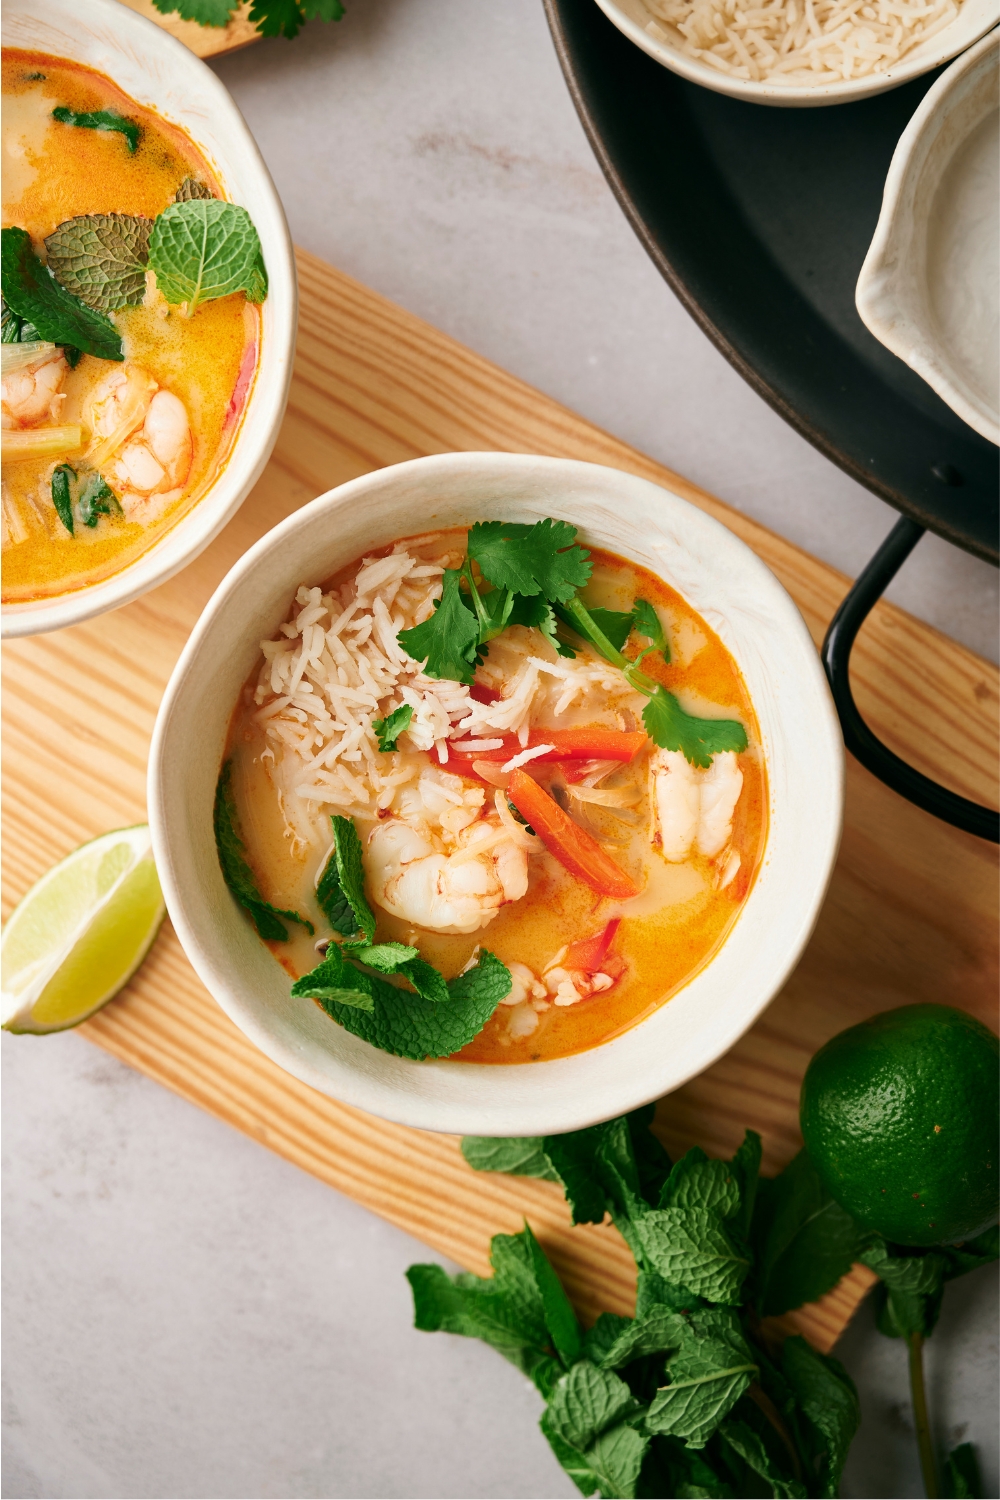 Rice, shrimp, and red bell peppers in a bowl of soup,.